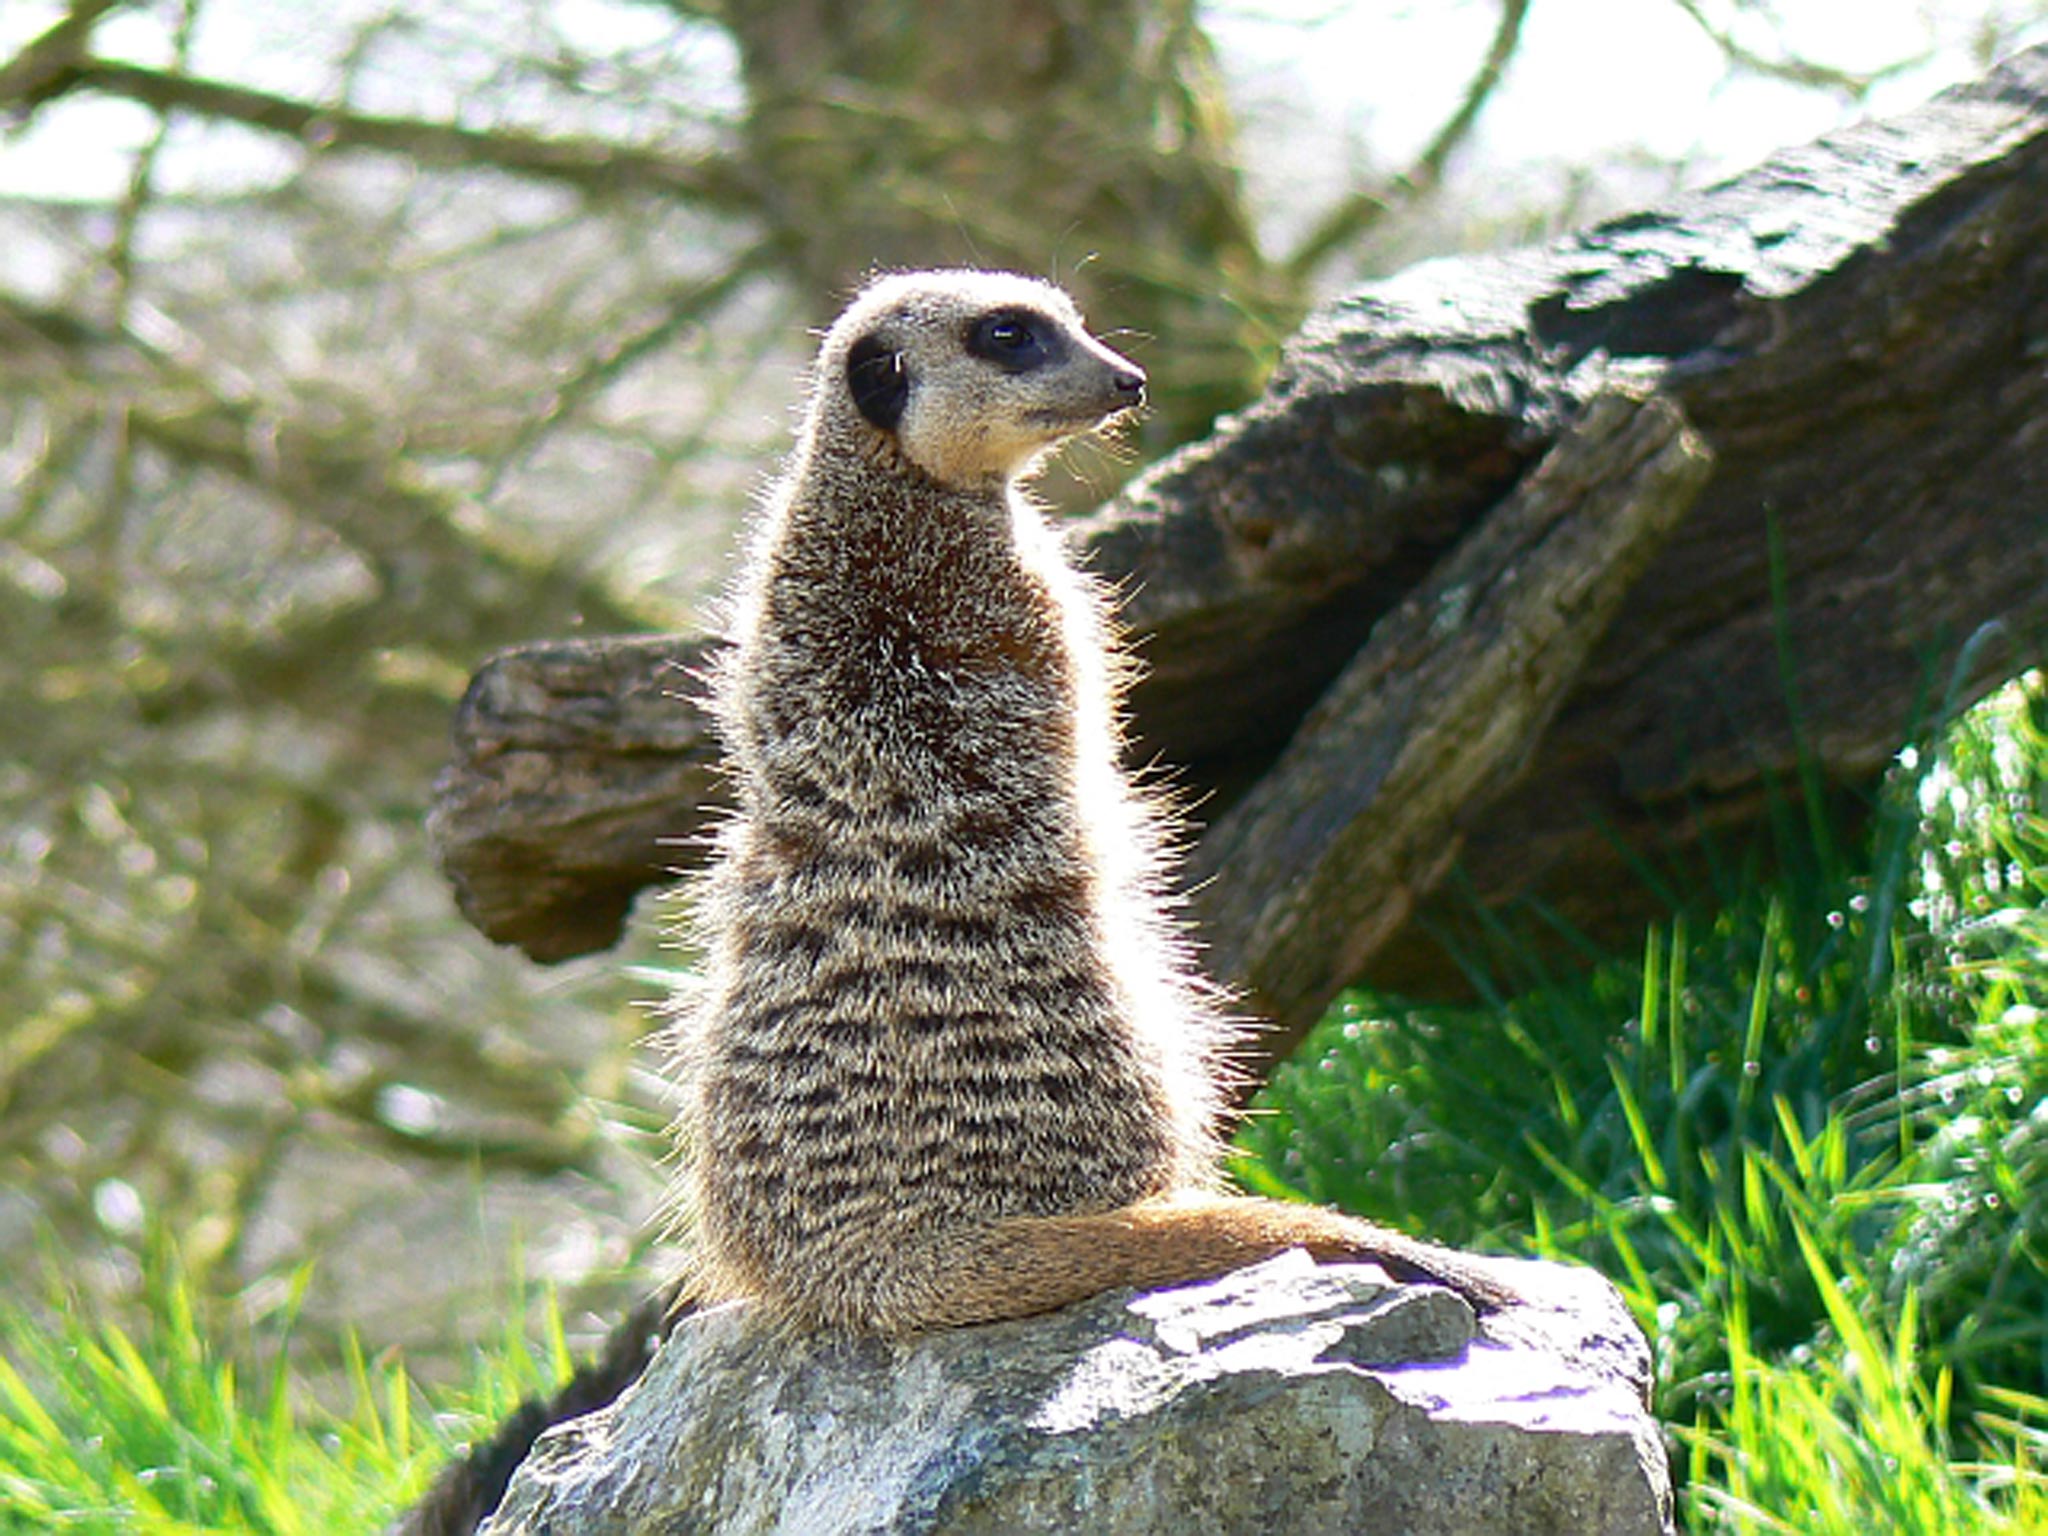 A meerkat is spotted at Longleat Safari Park, Wiltshire